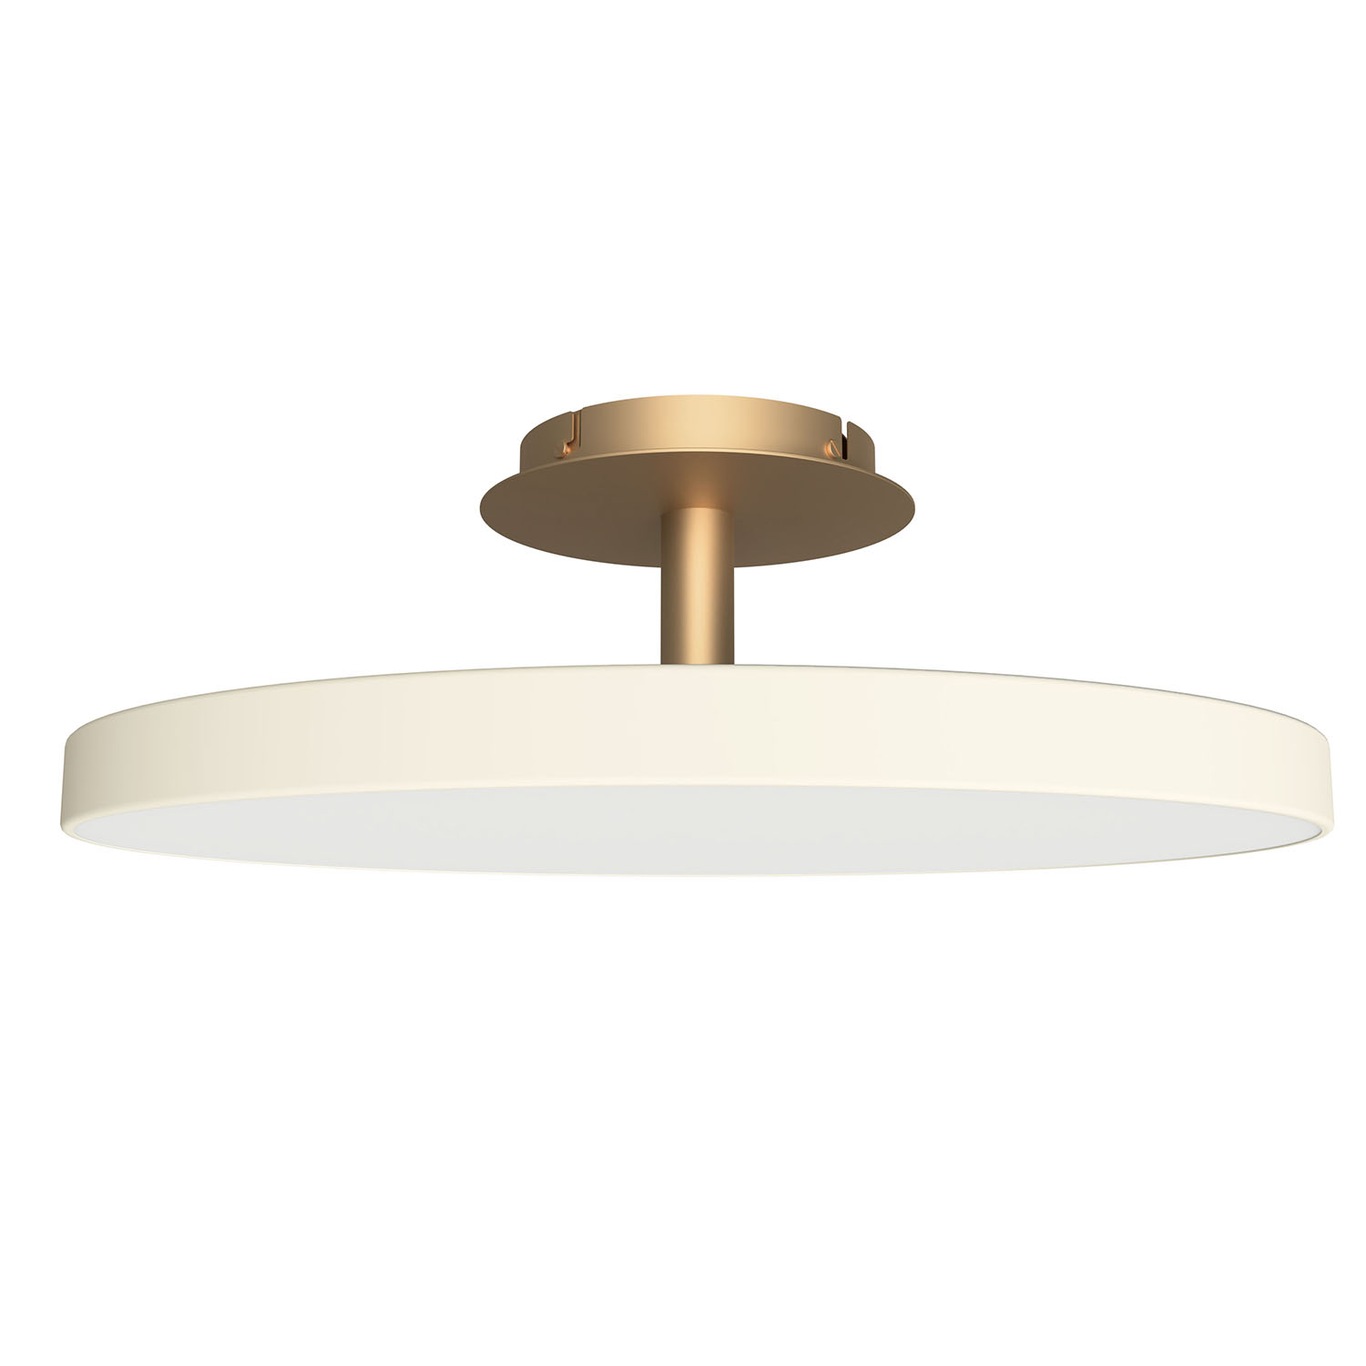 Asteria Up Loftslampe Large, Pearl White